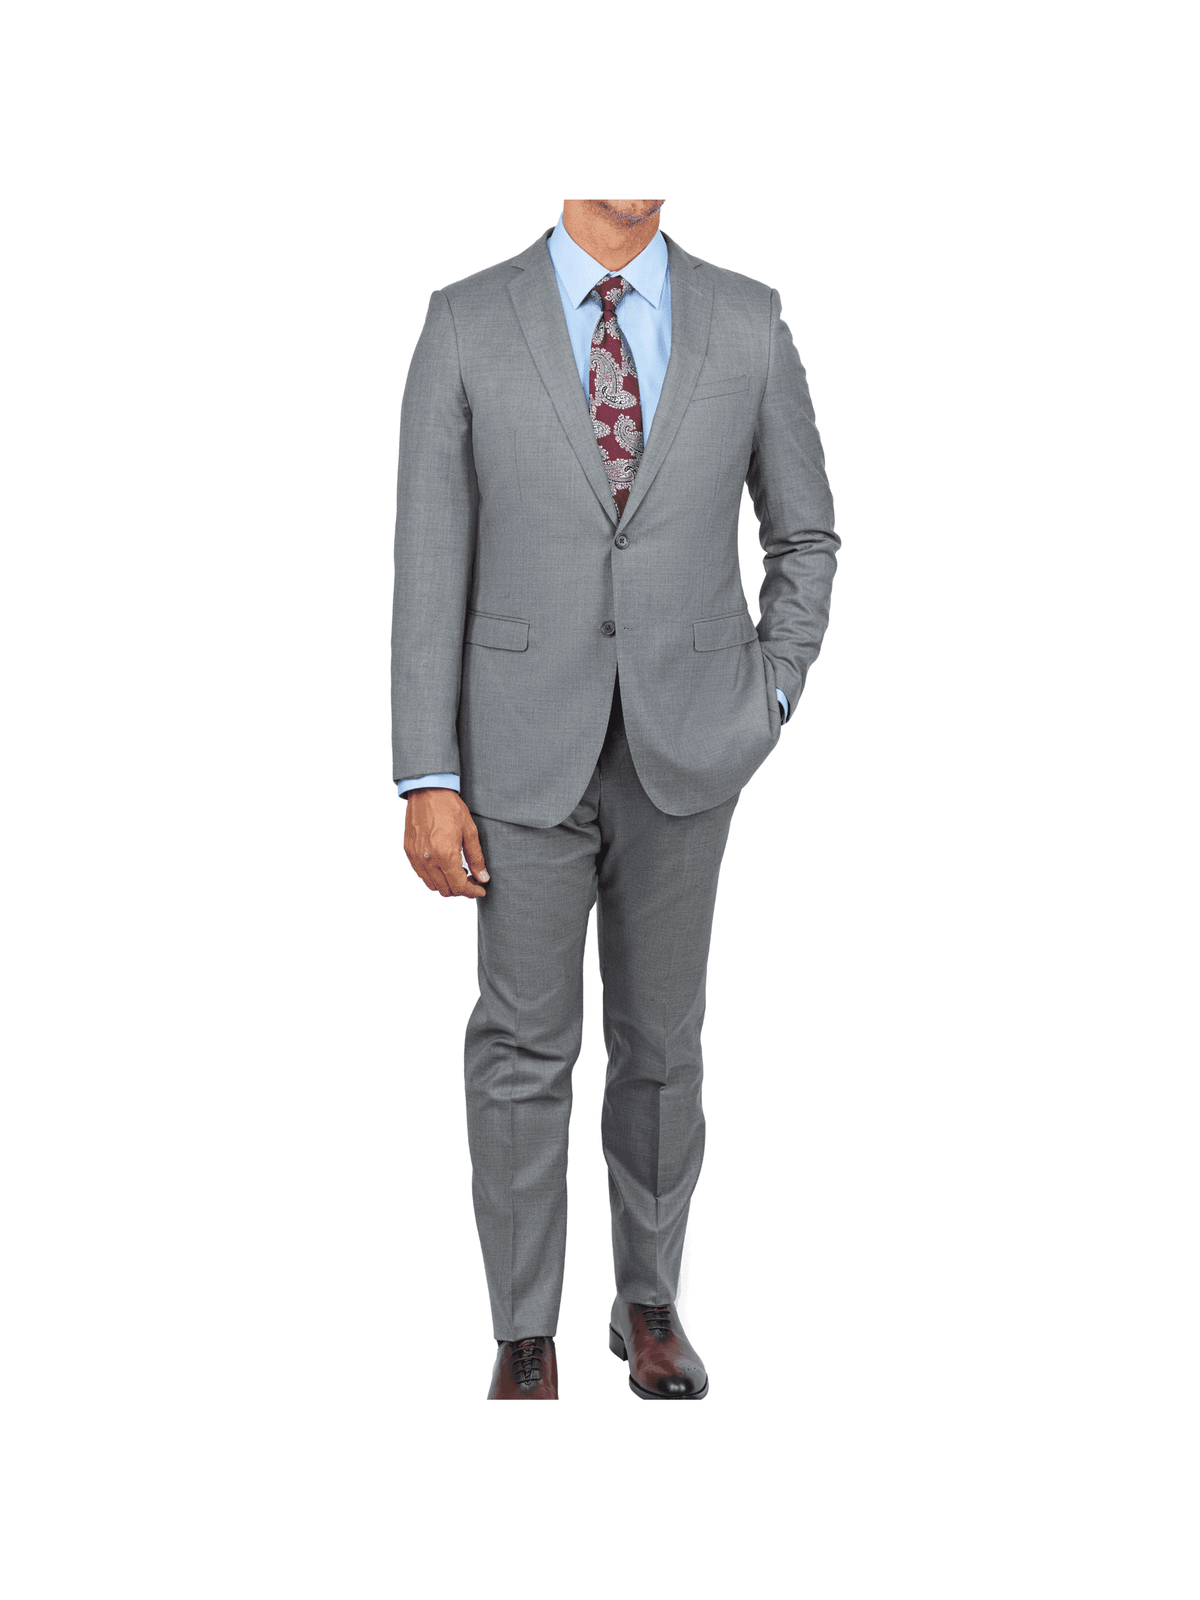 Blujacket SUITS Blujacket Mens Solid Light Gray Wool Cashmere Trim Fit 2 Piece Suit